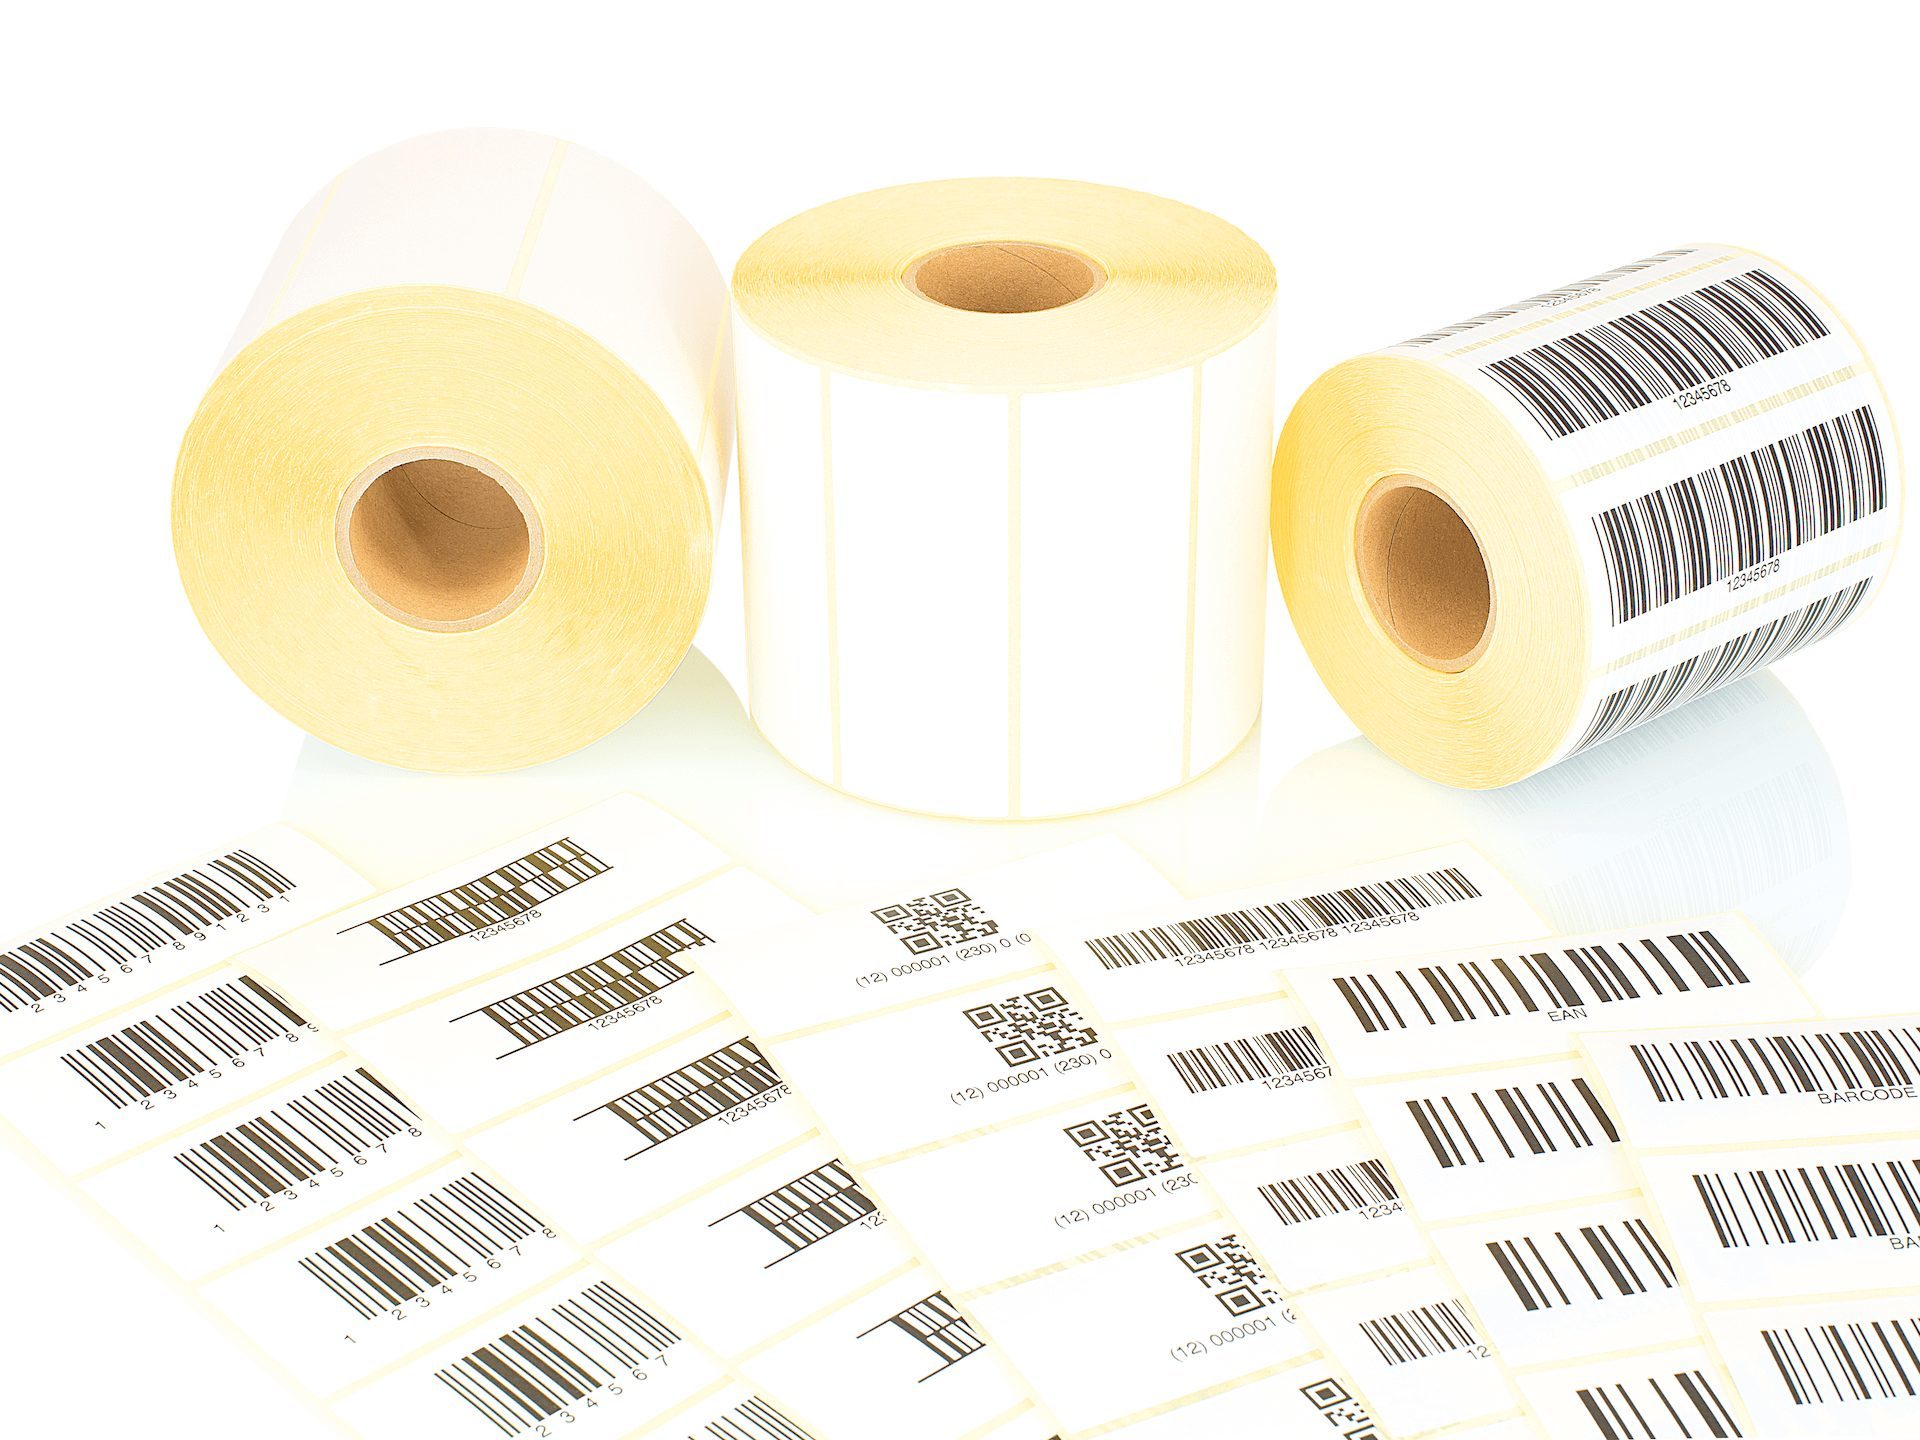 Barcodes printed on labels